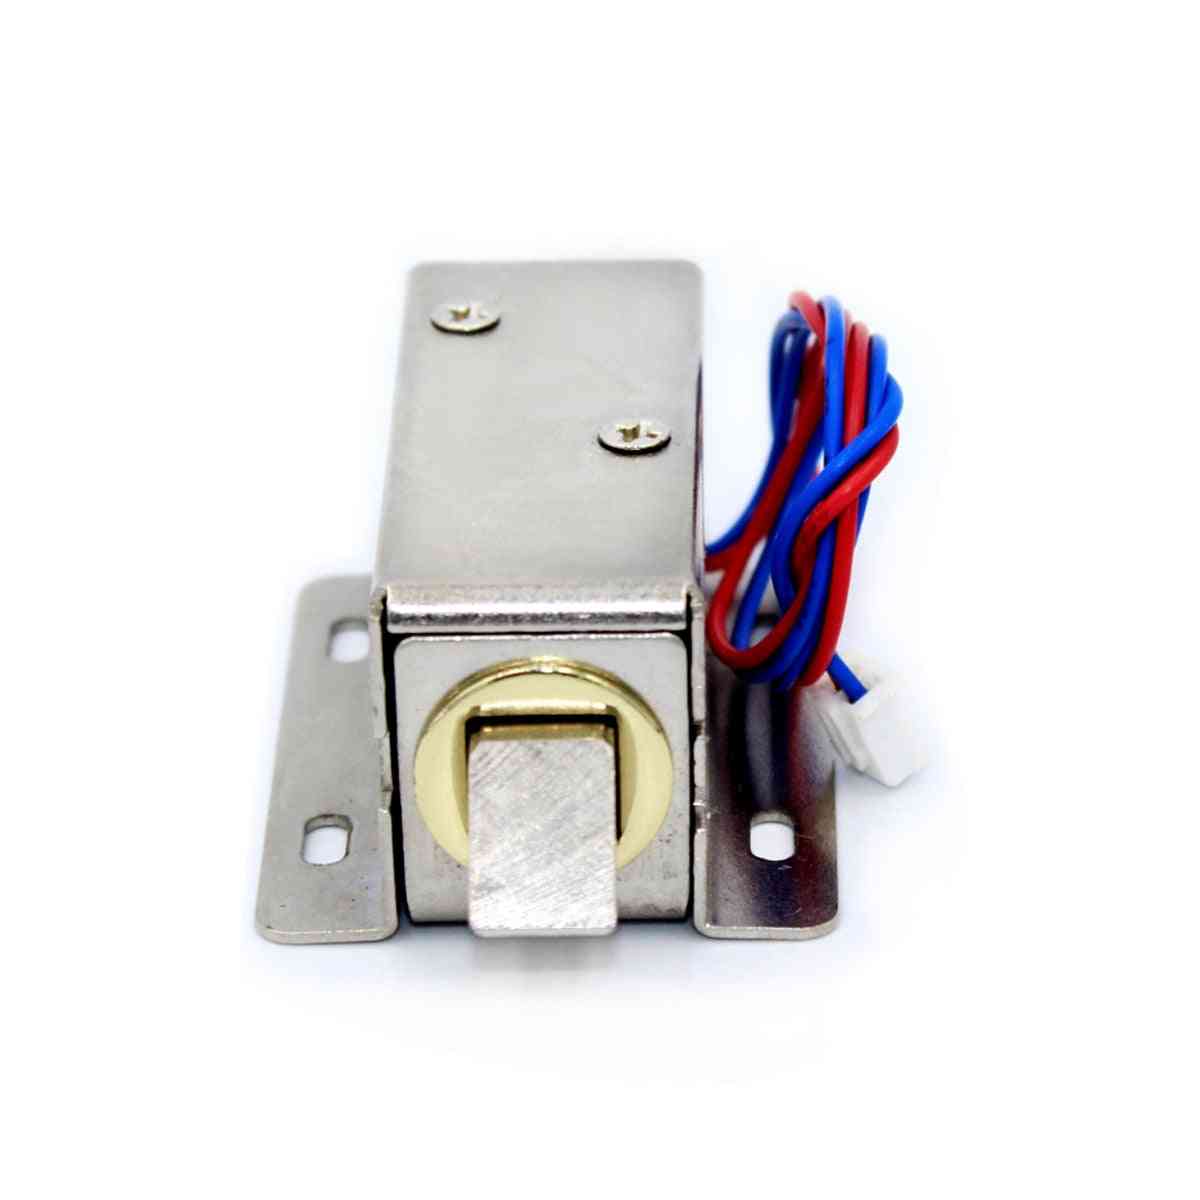 Electronic Door Lock Catch, Gate Assembly Solenoid, Access Control